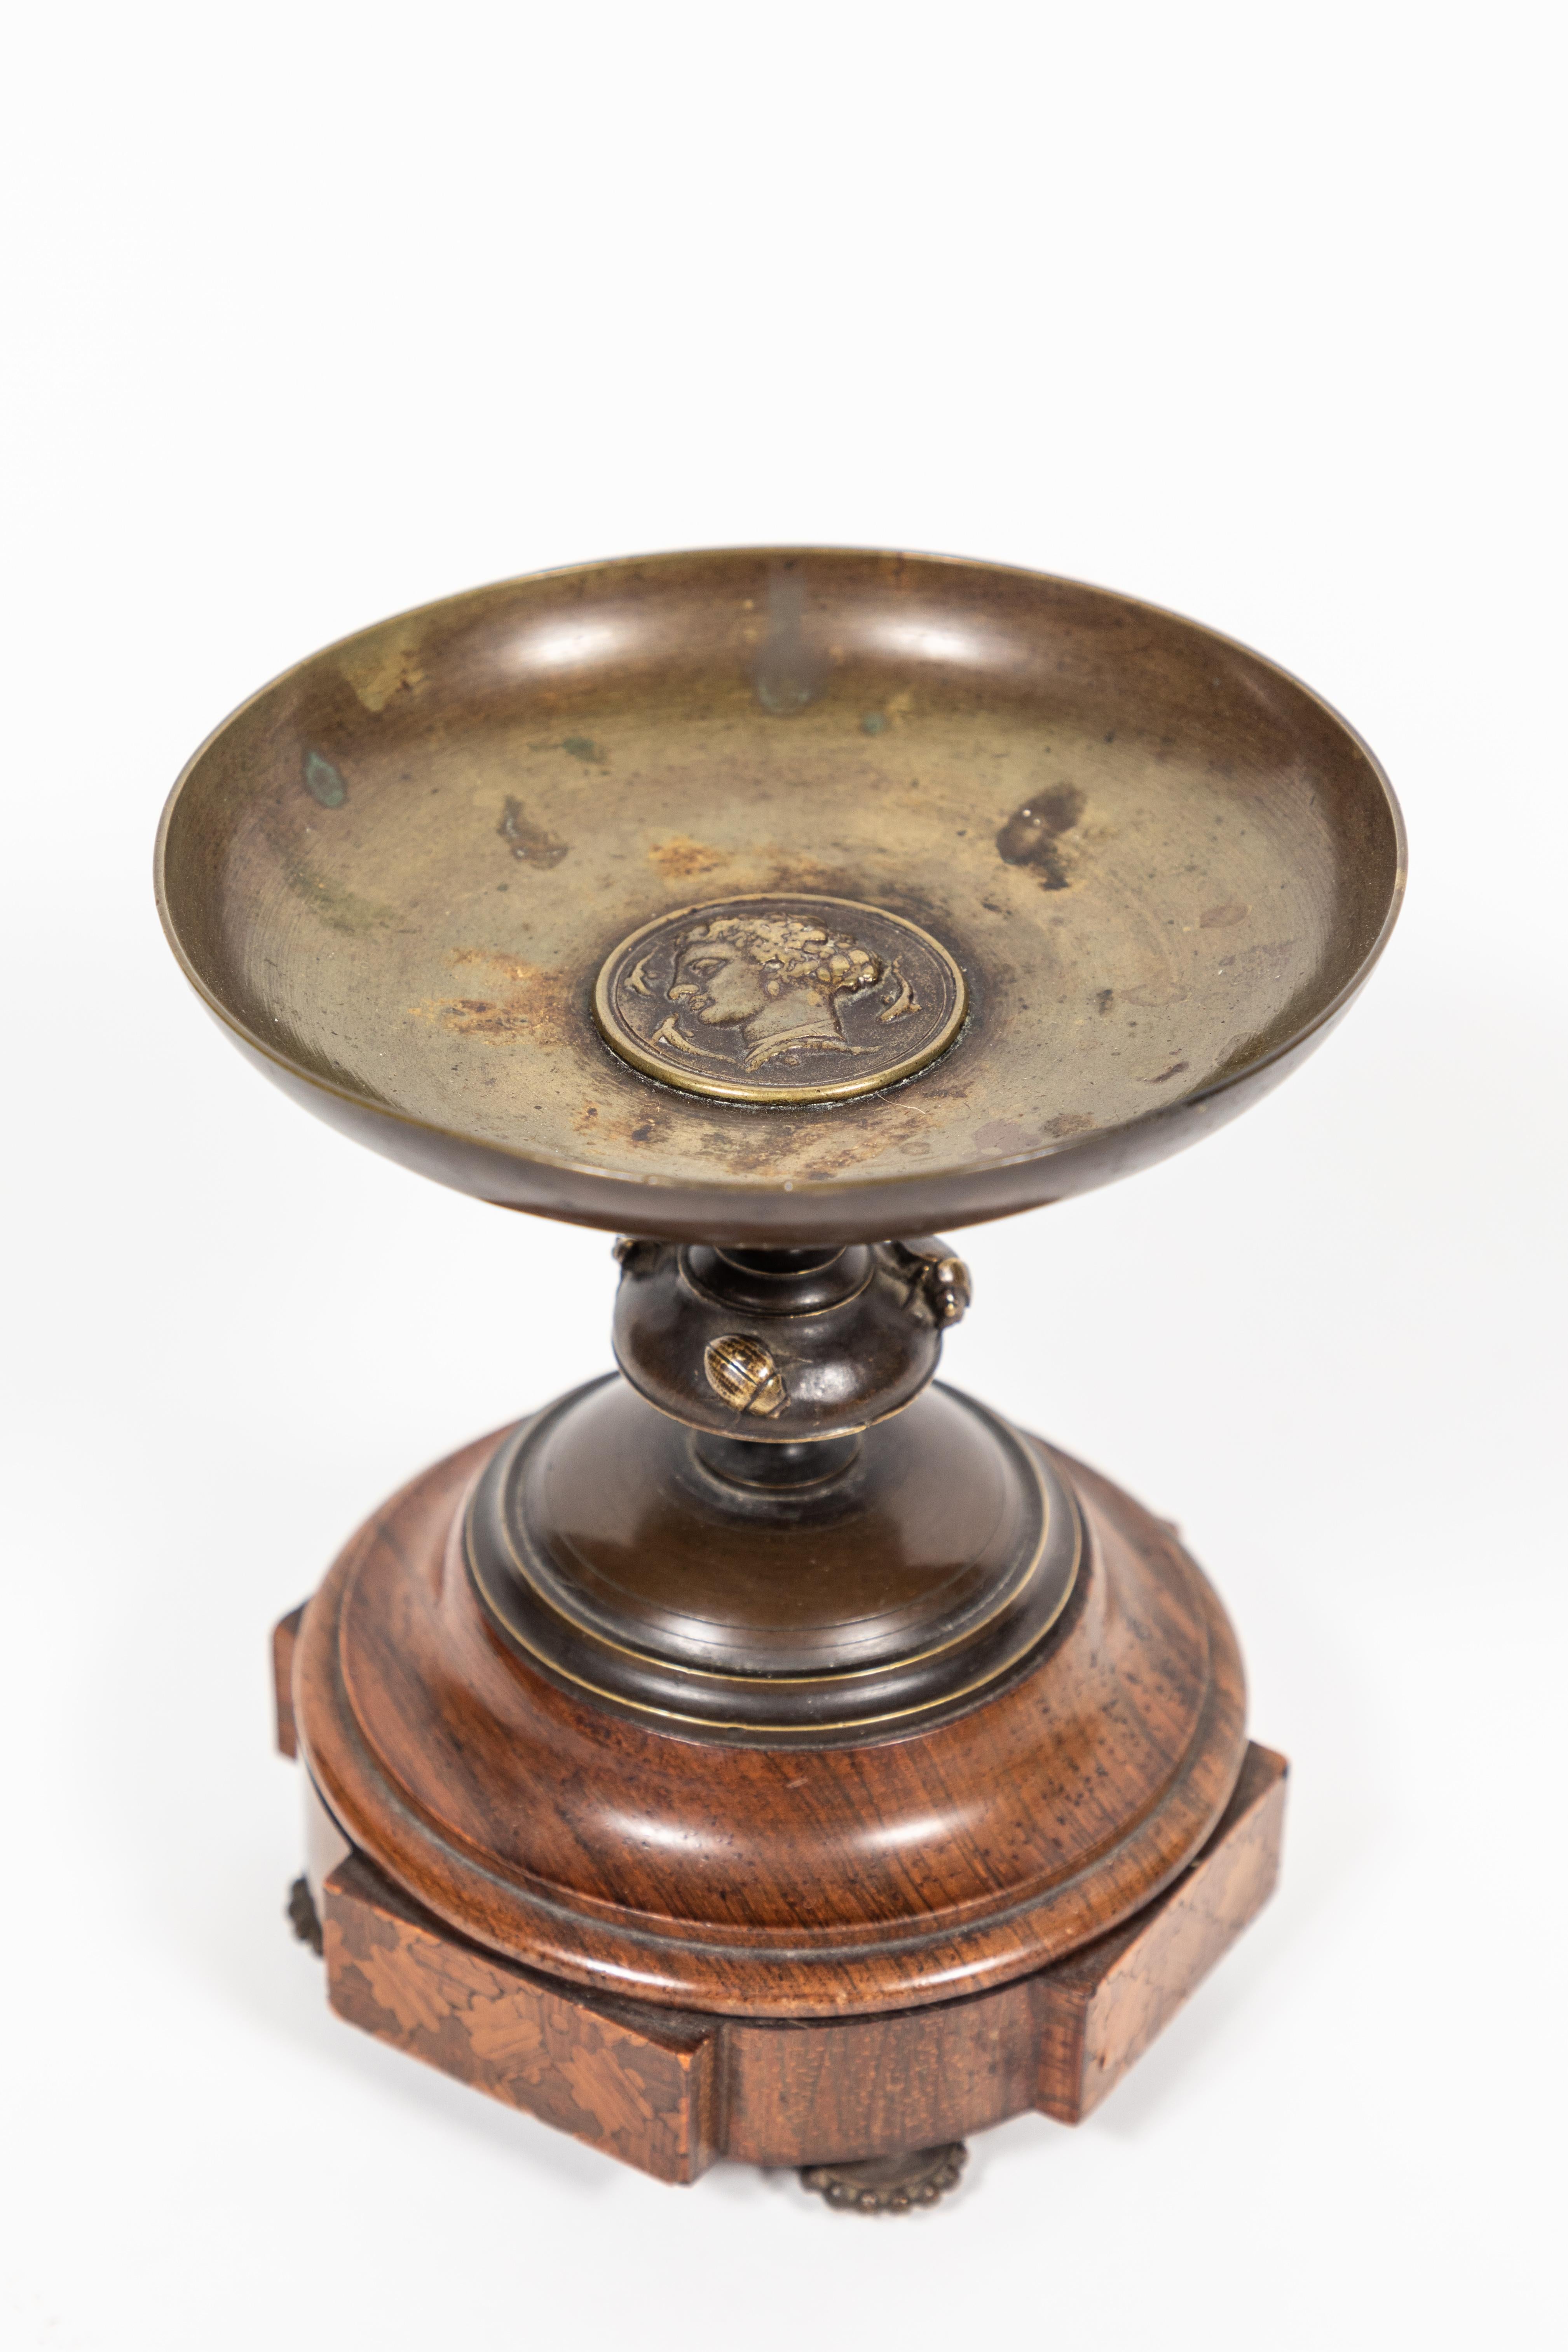 Antique bronze pedestal dish with Greco-Roman medallion of man's head. Second tier is adorned by 3 Scarabs. The beautifully grained wood base has 4 intricate marquetry panels and is finished off by decorative beaded metal feet.